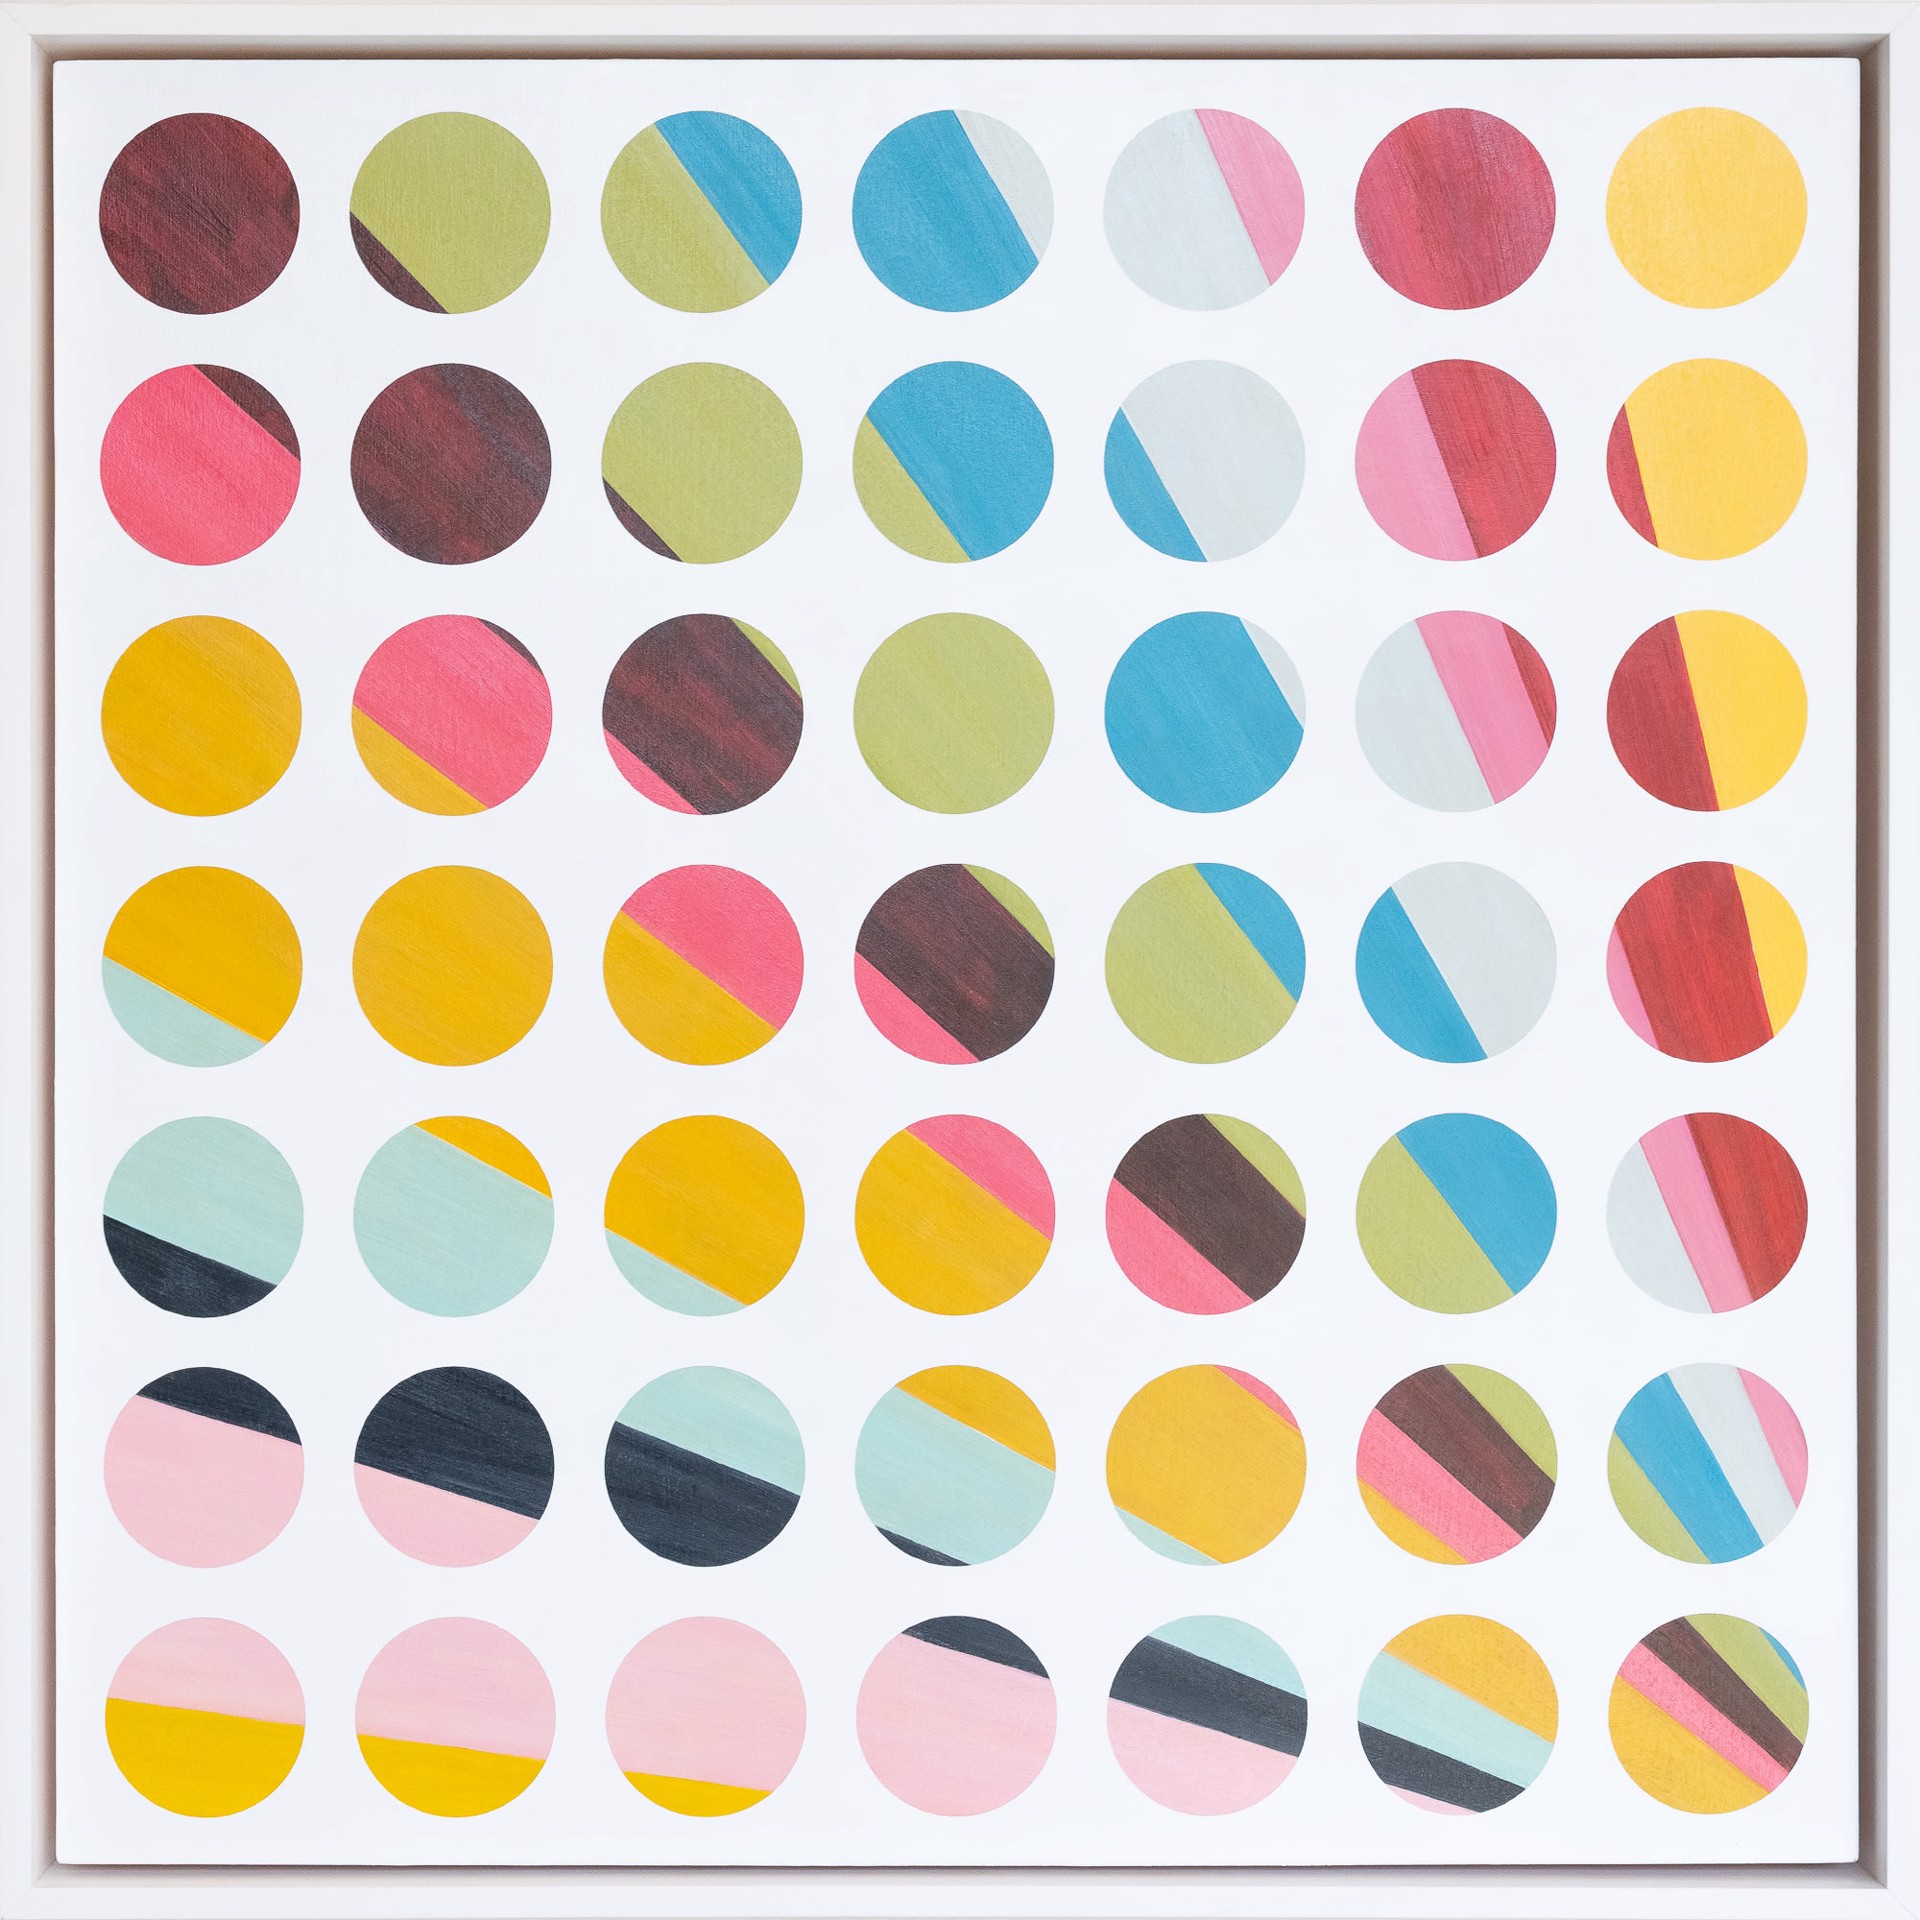 Stripey Dots Seven by Seven No. 1 by Hana Moore